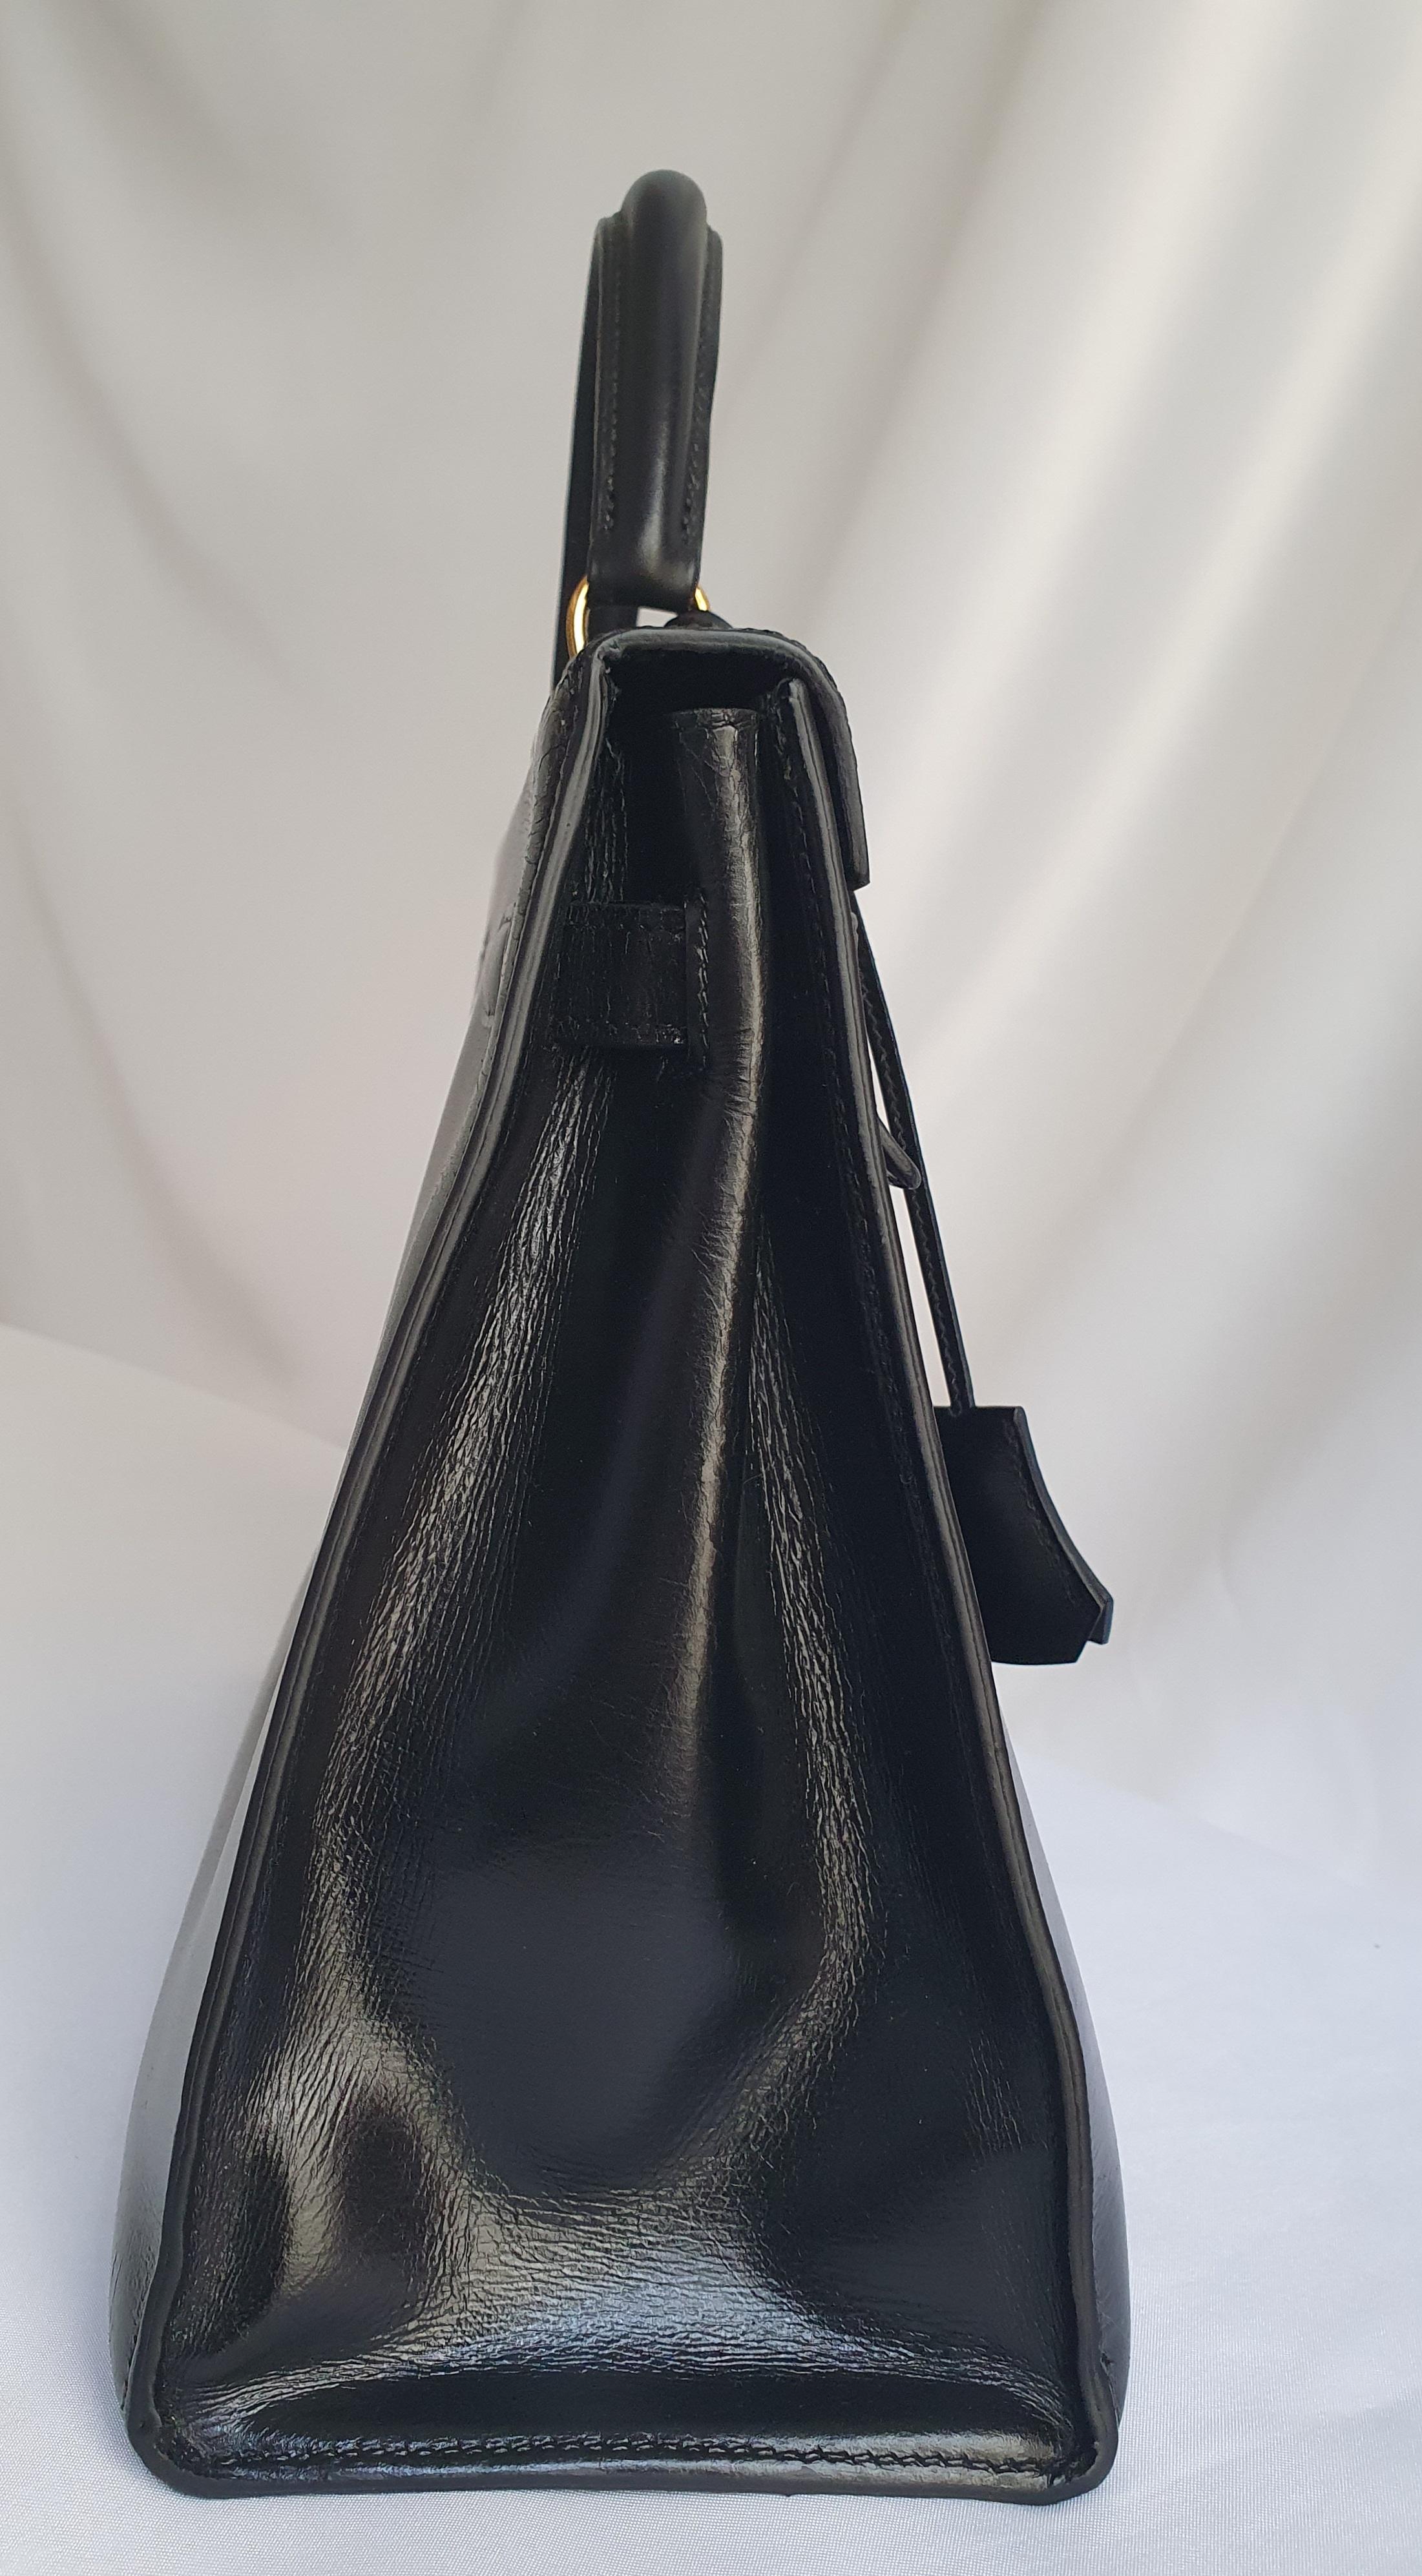 - Designer: HERMÈS
- Model: Kelly
- Condition: Very good condition. Sign of wear on Leather, Scratches on hardware, Bag restored by a professional
- Accessories: Padlock, Keys
- Measurements: Width: 33cm, Height: 22,5cm, Depth: 12cm
- Exterior